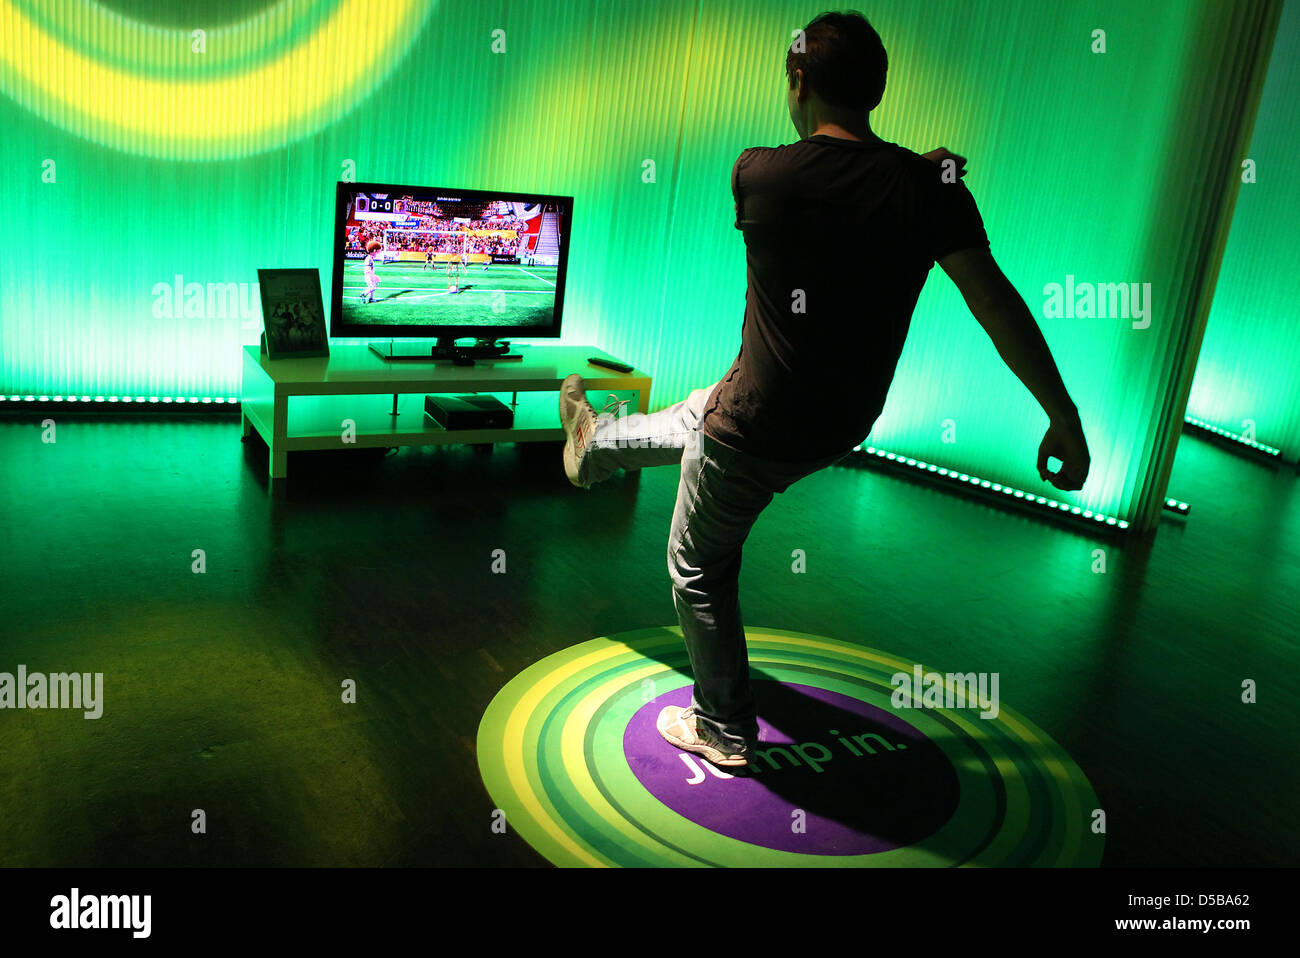 A man checks out Microsoft's new Xbox 360 equipped with 'Kinect' kinetic  controller at the Gamescom trade fair in Cologne, Germany, 17 August 2010.  Microsoft announces the new Xbox 360 is in